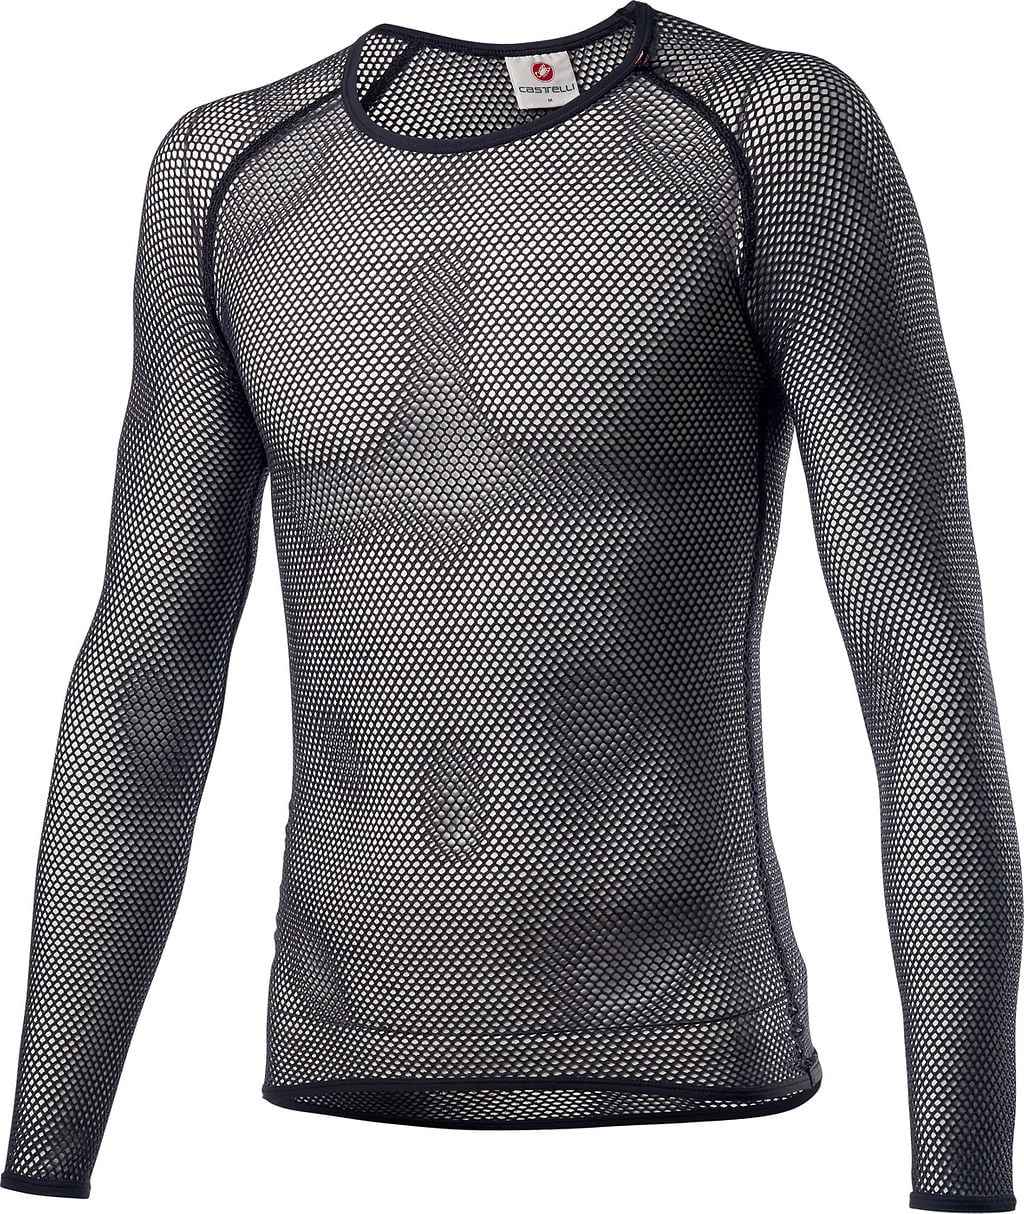 Miracolo Wool Long Sleeve Cycling Base Layer Base Layer, for men, size 2XL